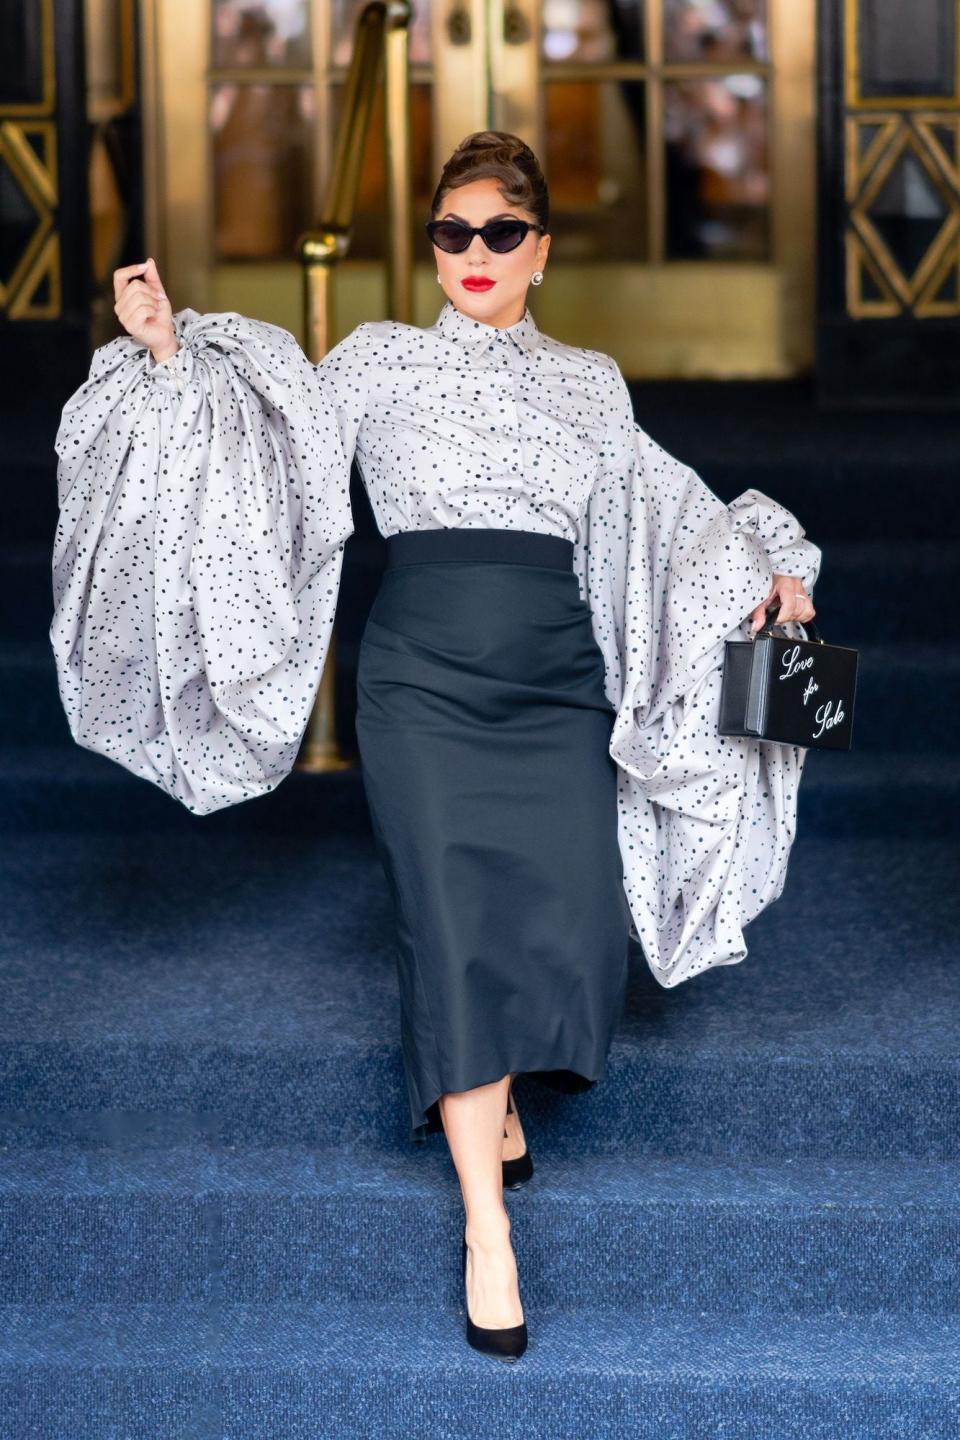 Lady Gaga leaves a New York City hotel in July 2021.